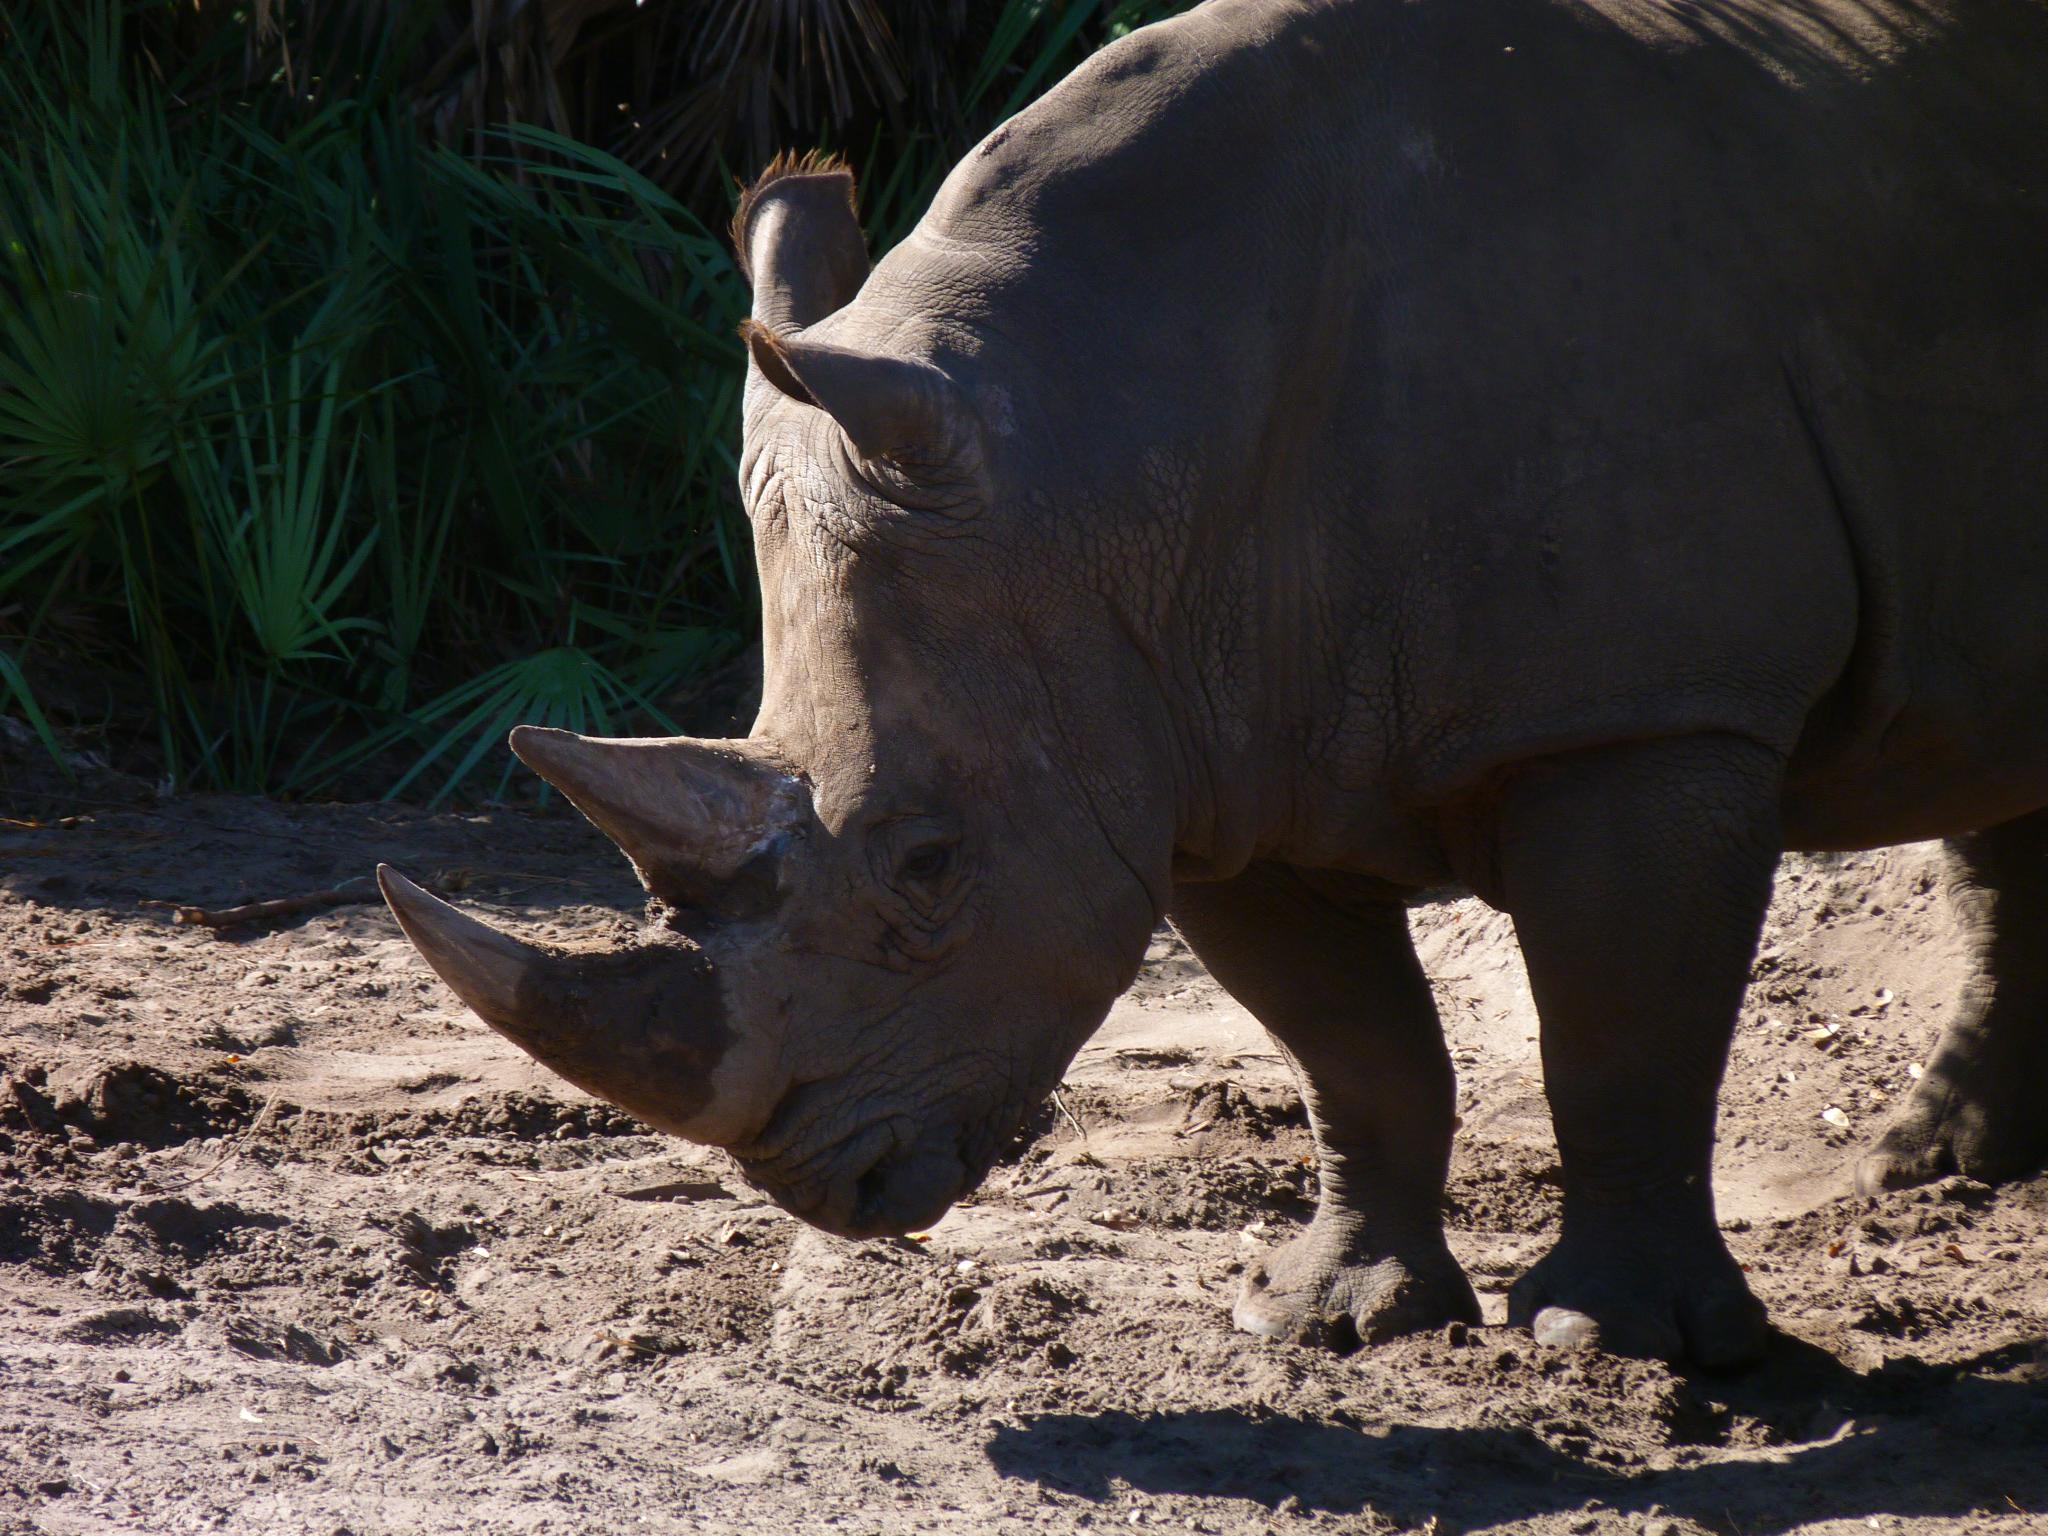 an adult rhino grazing in the dirt on a sunny day